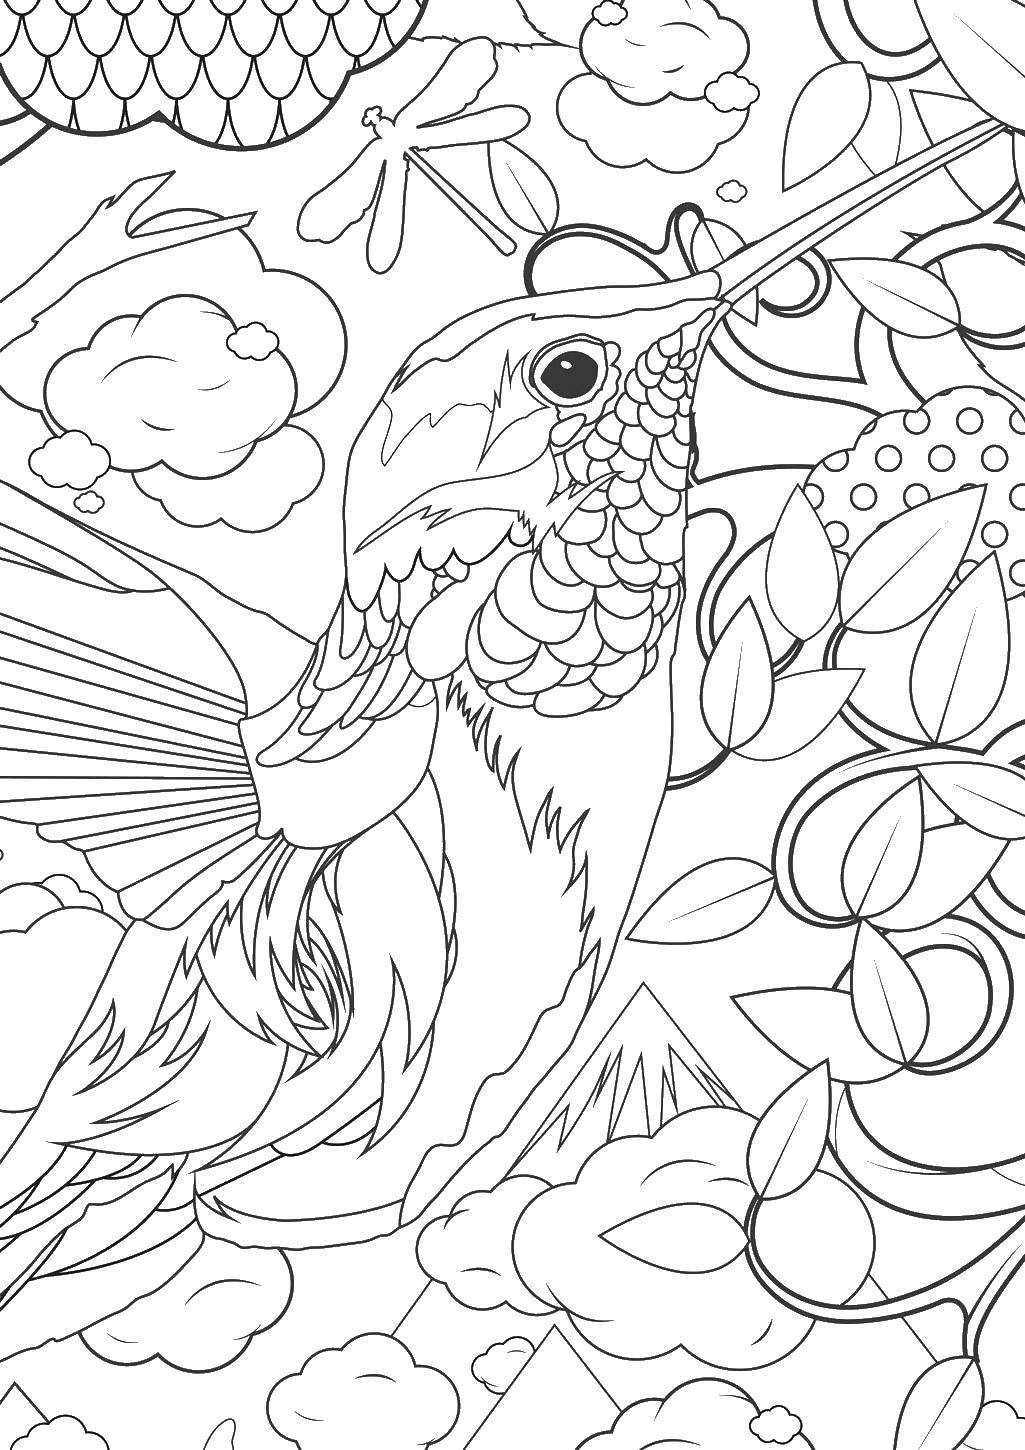 Coloring A bird in the leaves. Category birds. Tags:  the bird, leaves, dragonfly.